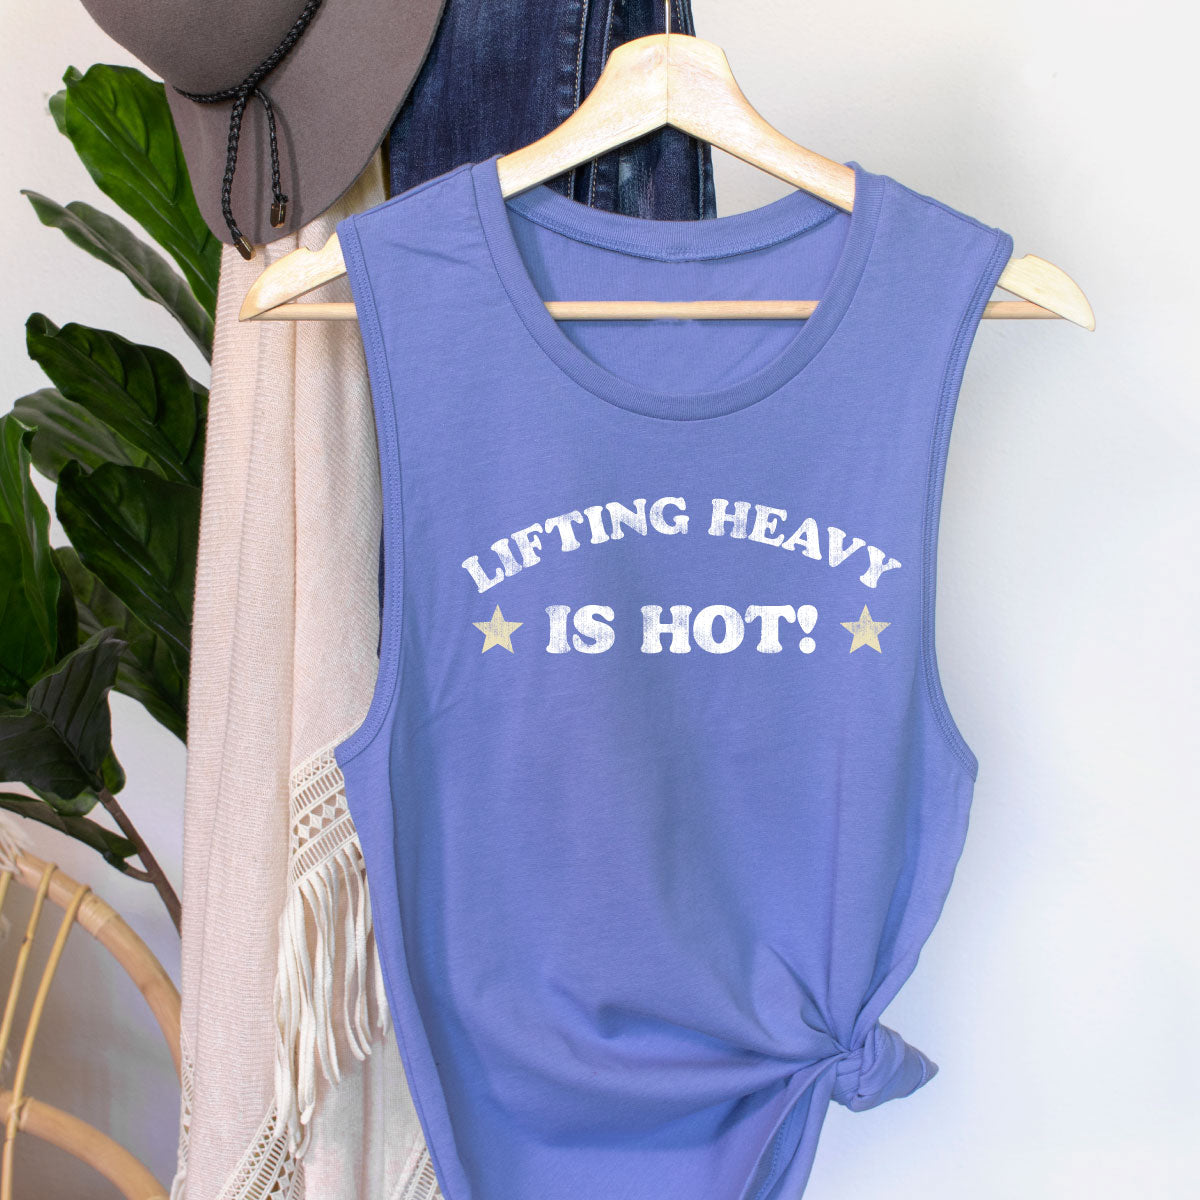 Lifting Heavy is Hot Women’s Fitted V.I.T.™ Festival Tank